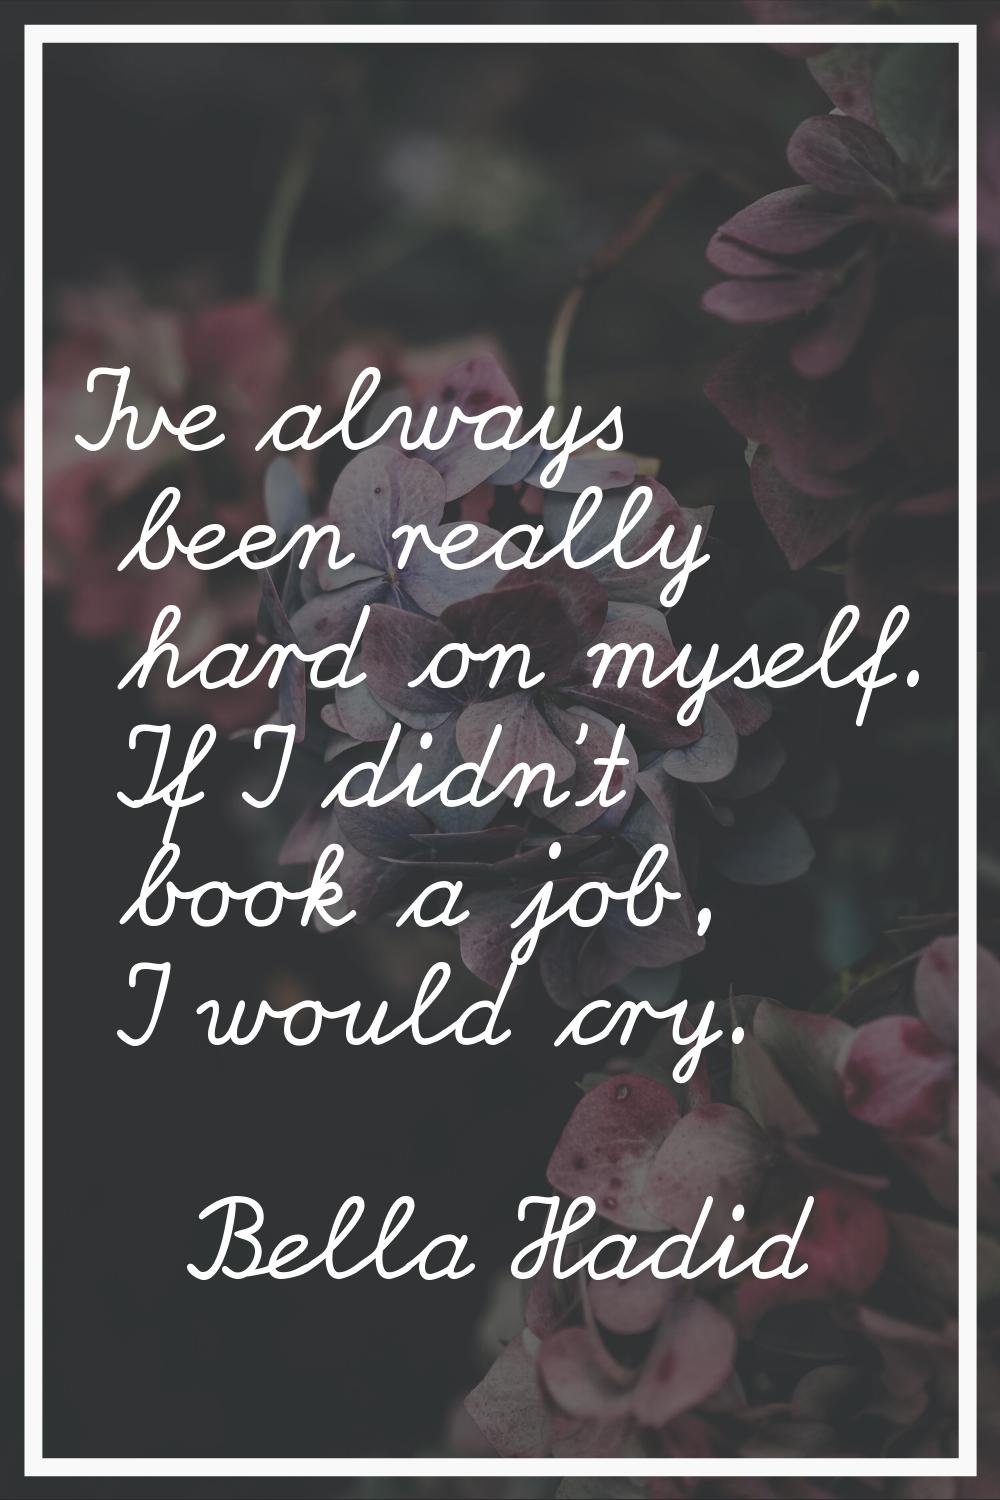 I've always been really hard on myself. If I didn't book a job, I would cry.